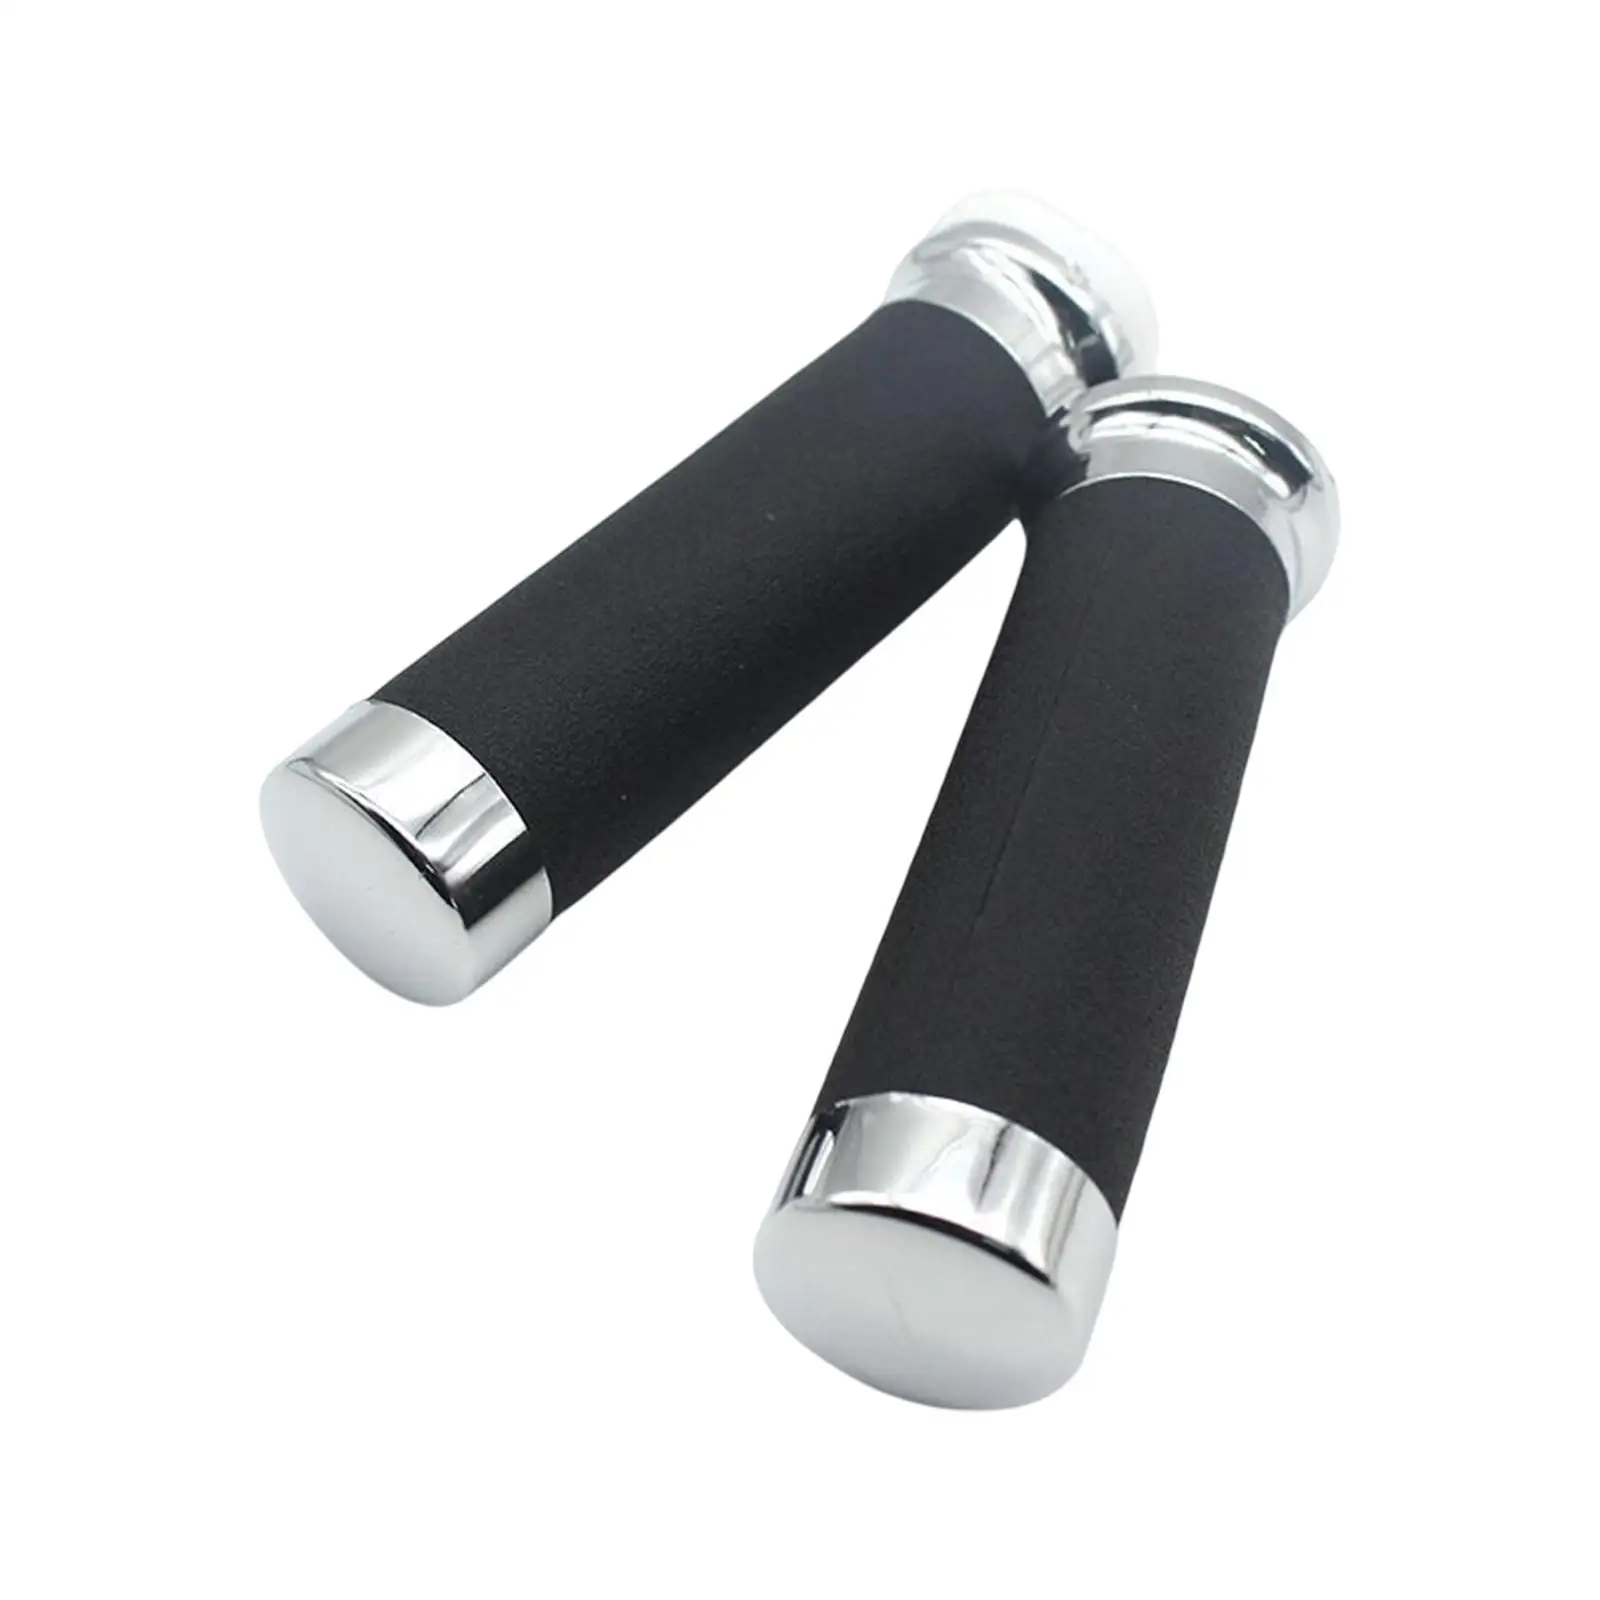 2Pcs 28mm Motorcycle Handlebar Grips Handle Grips for Shadow 400 750 Accessories Durable